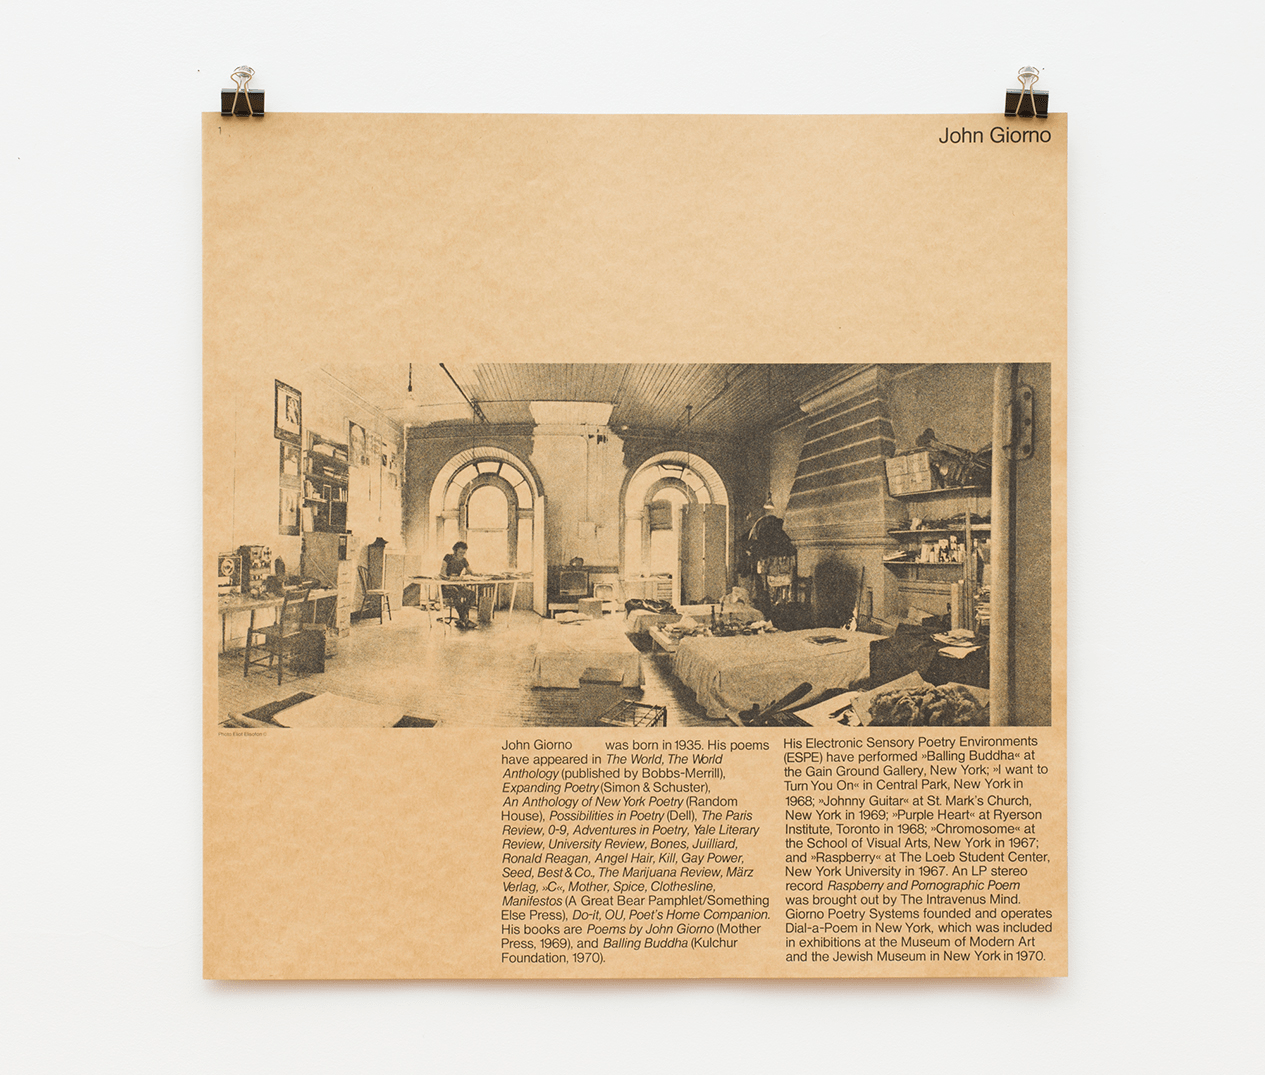 &amp;copy; 1971 On The Bowery Portfolio, Domberger Editions